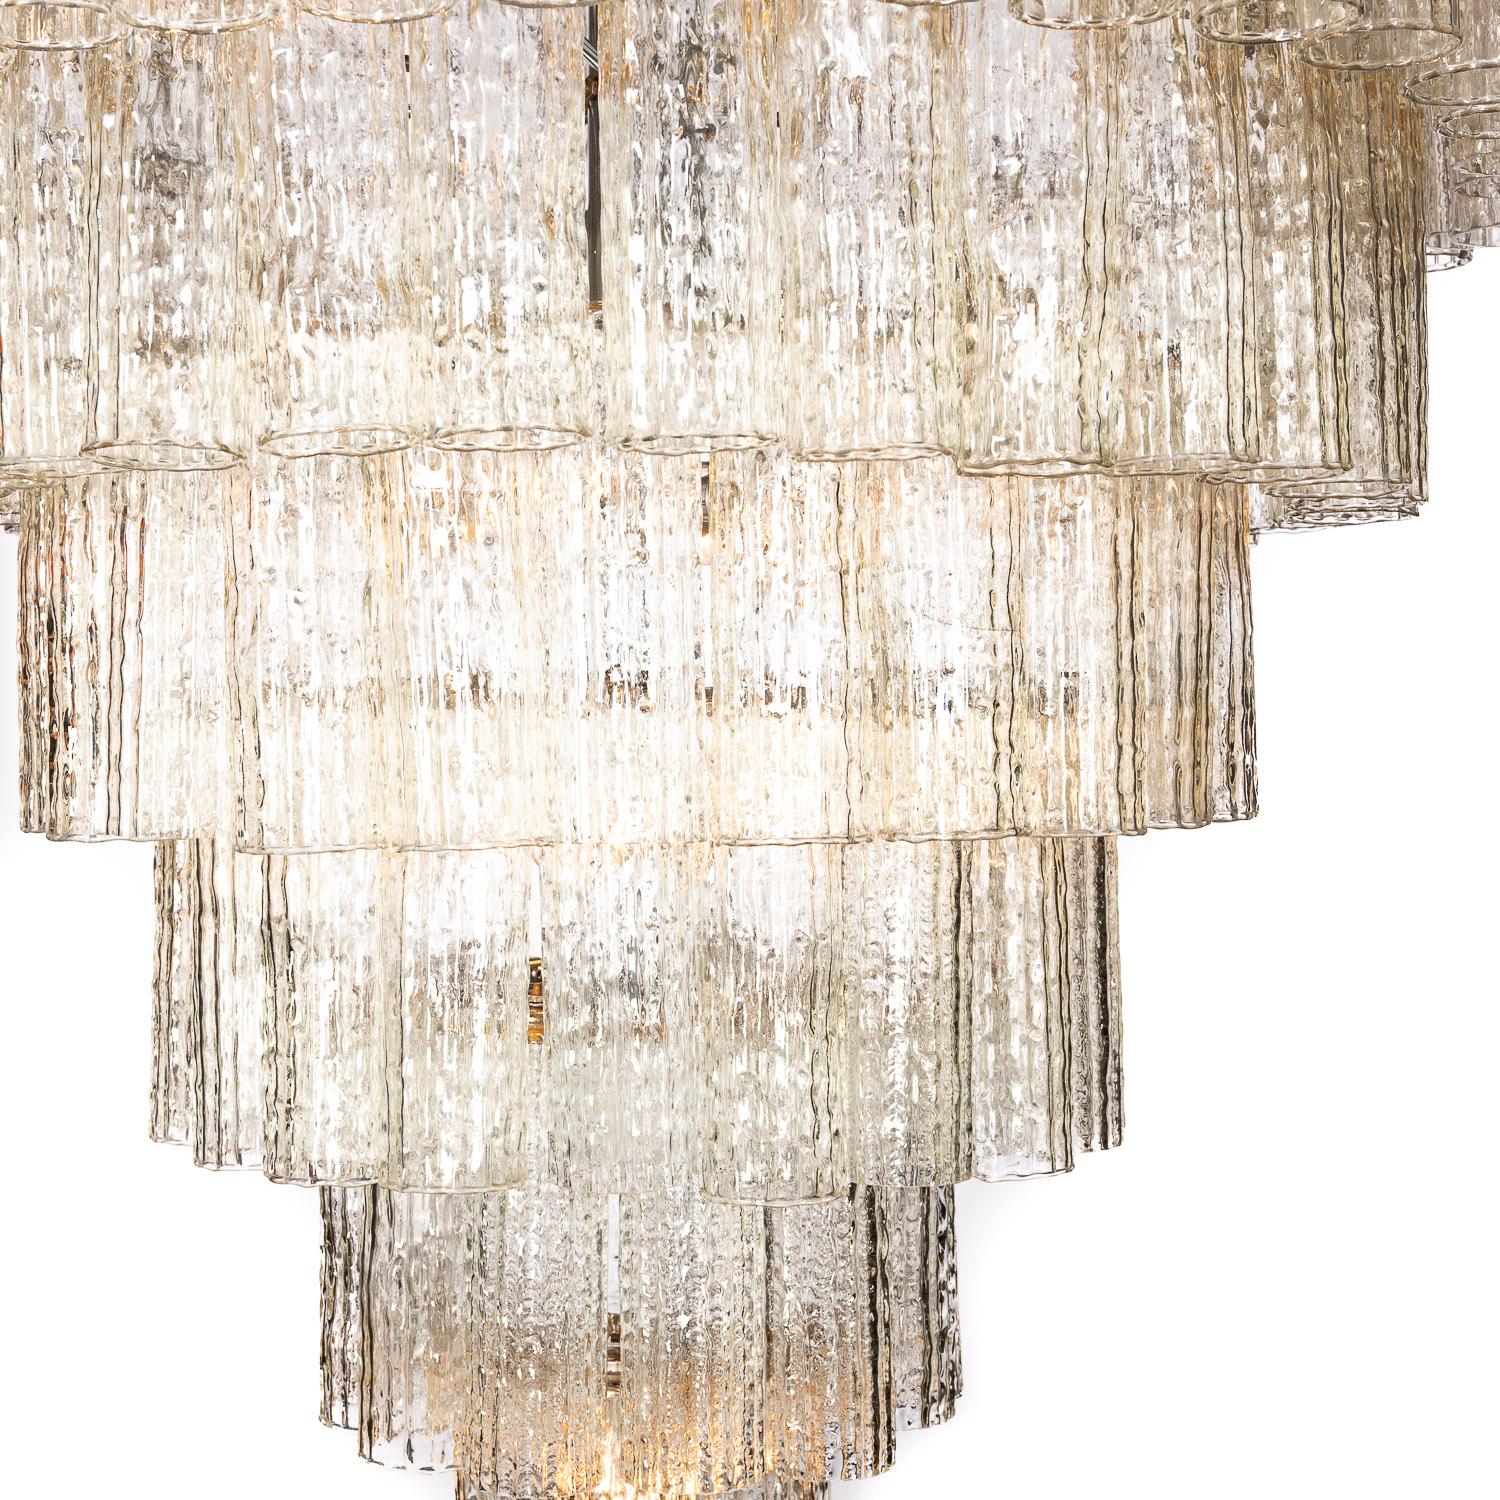 1968 pair of custom Venini chandeliers, from the 